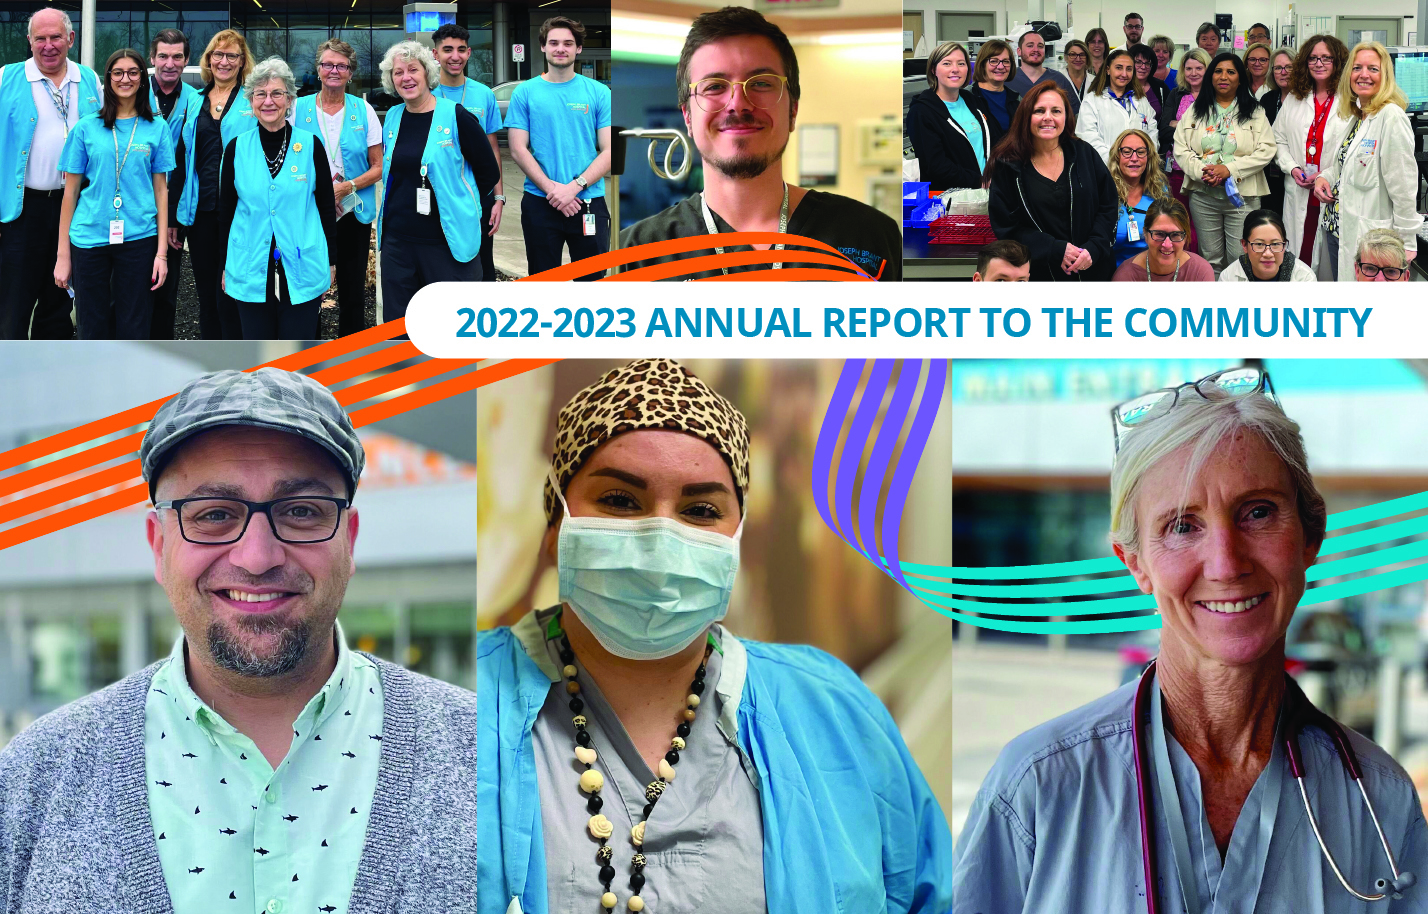 2022-2023 Annual Report to the Community